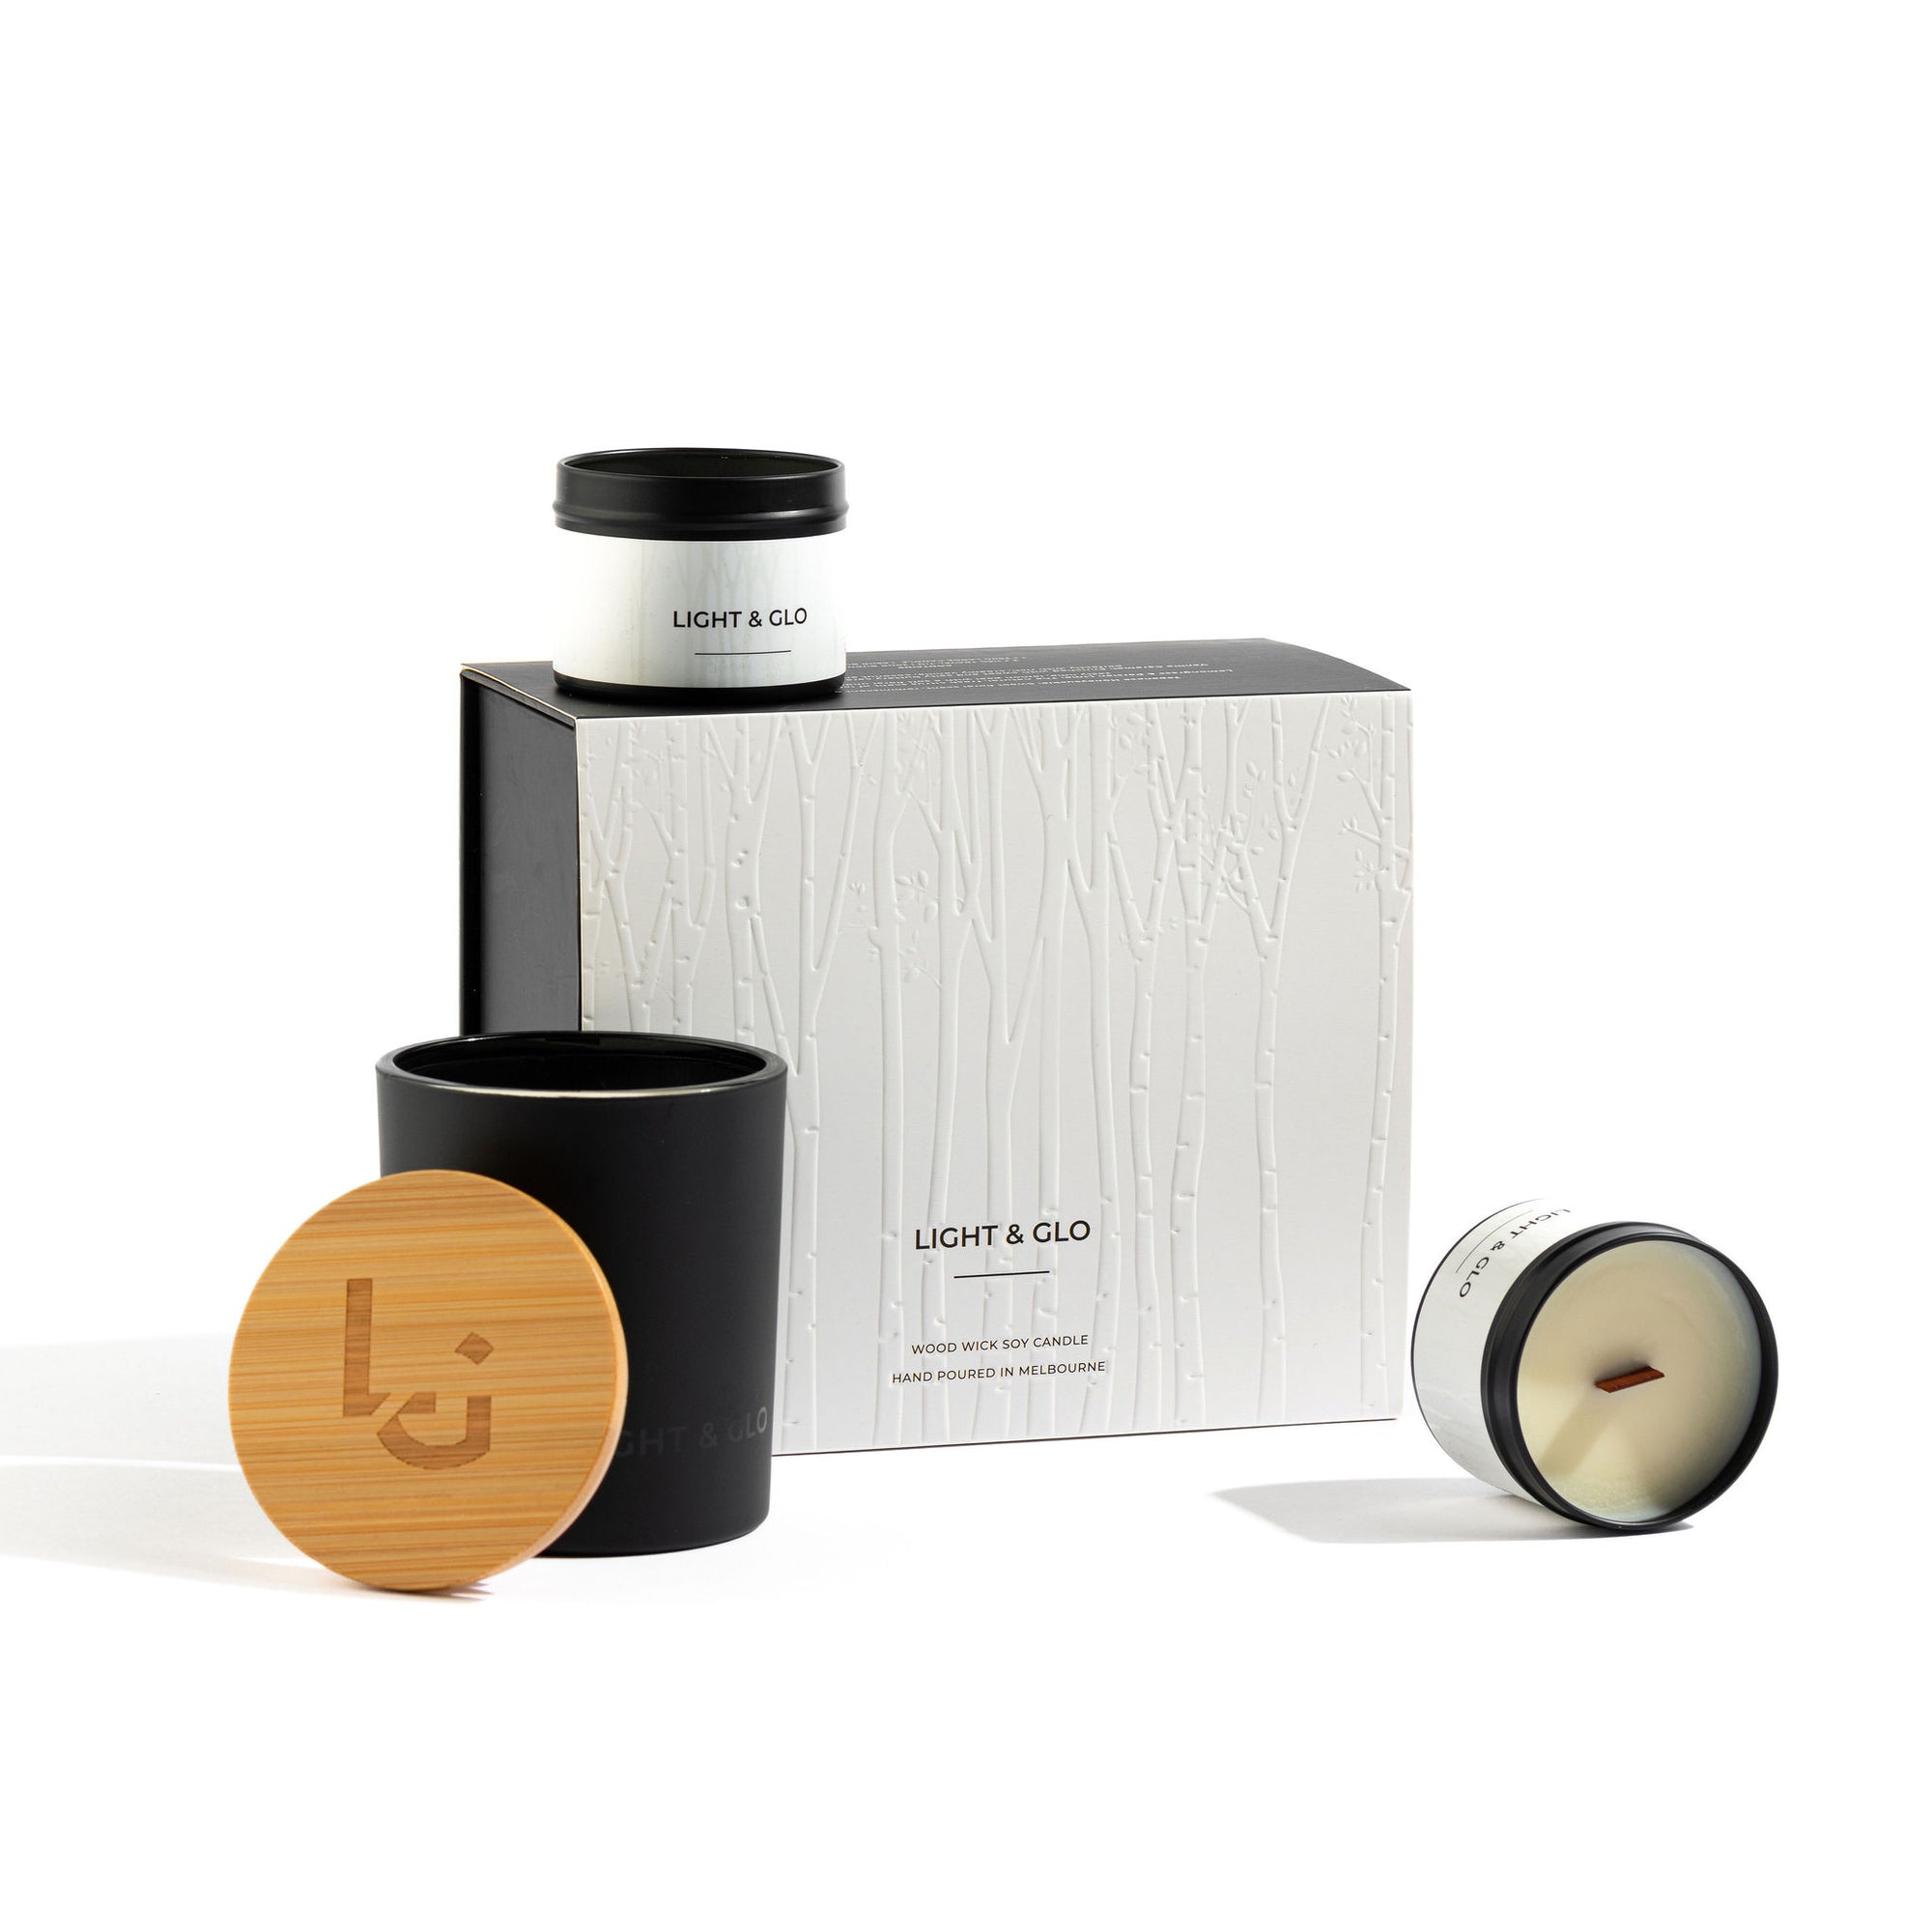 Monochrome Large Gift Box | Luxury Candles & Home Fragrances by Light + Glo